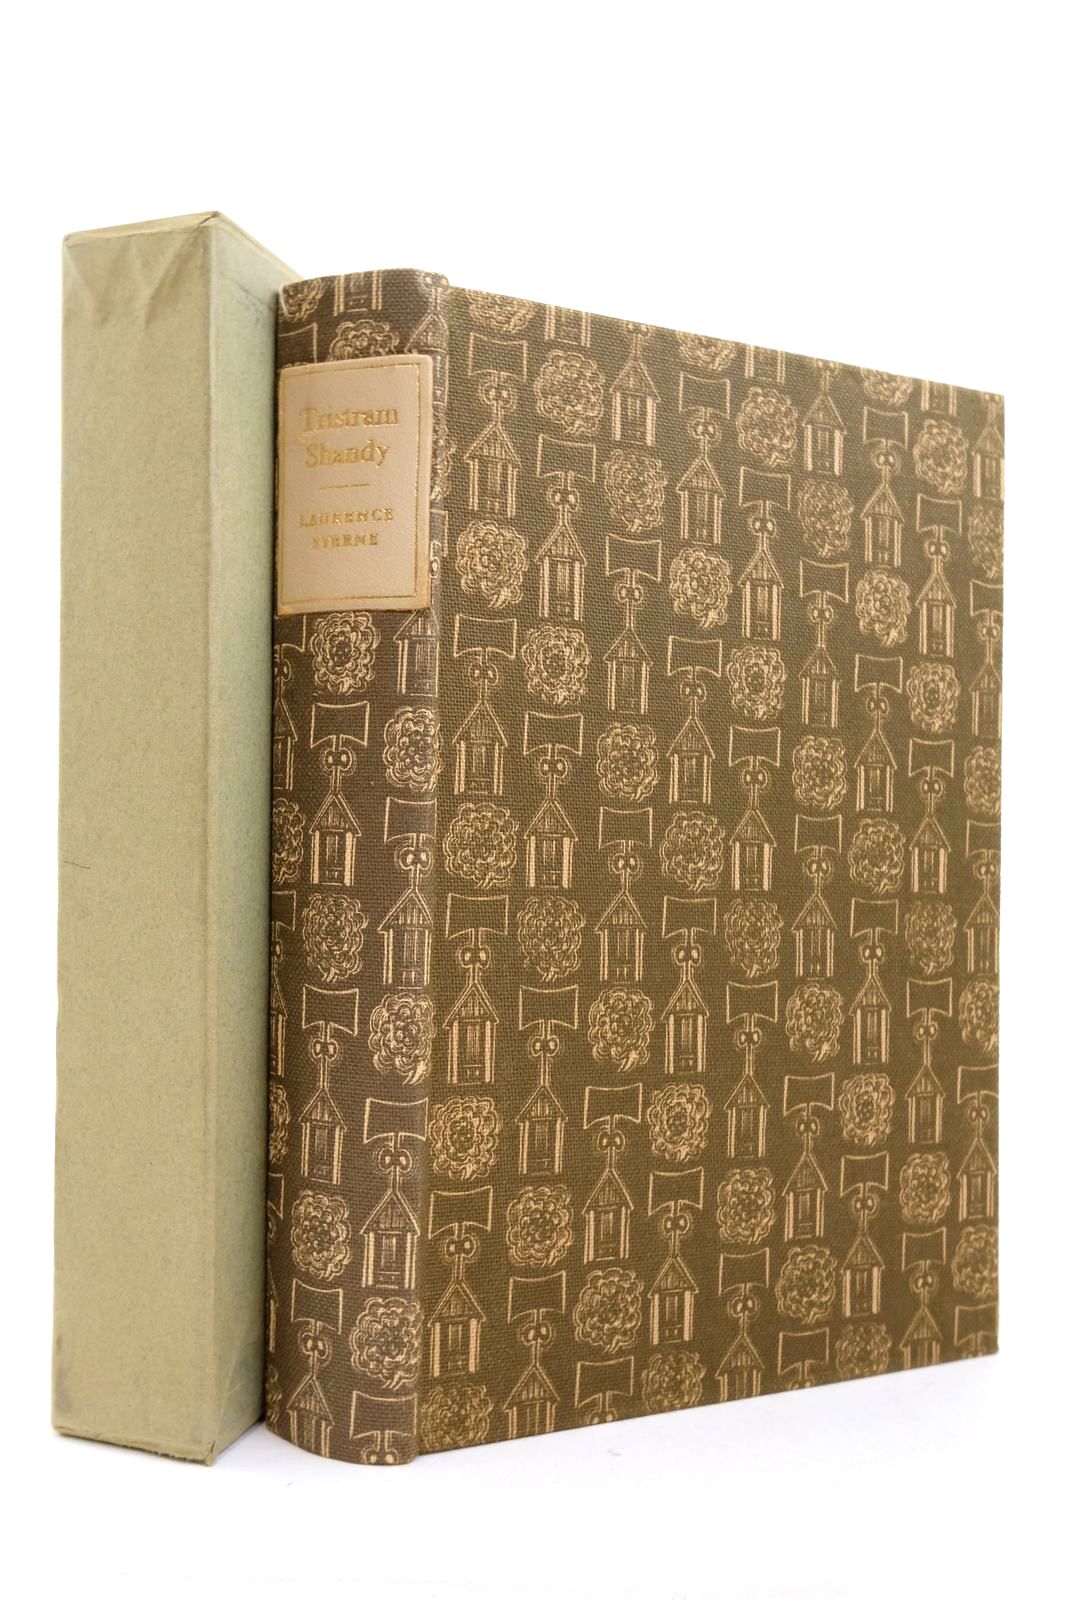 Photo of THE LIFE AND OPINIONS OF TRISTRAM SHANDY GENTLEMAN written by Sterne, Laurence illustrated by Lawrence, John published by Folio Society (STOCK CODE: 2138276)  for sale by Stella & Rose's Books